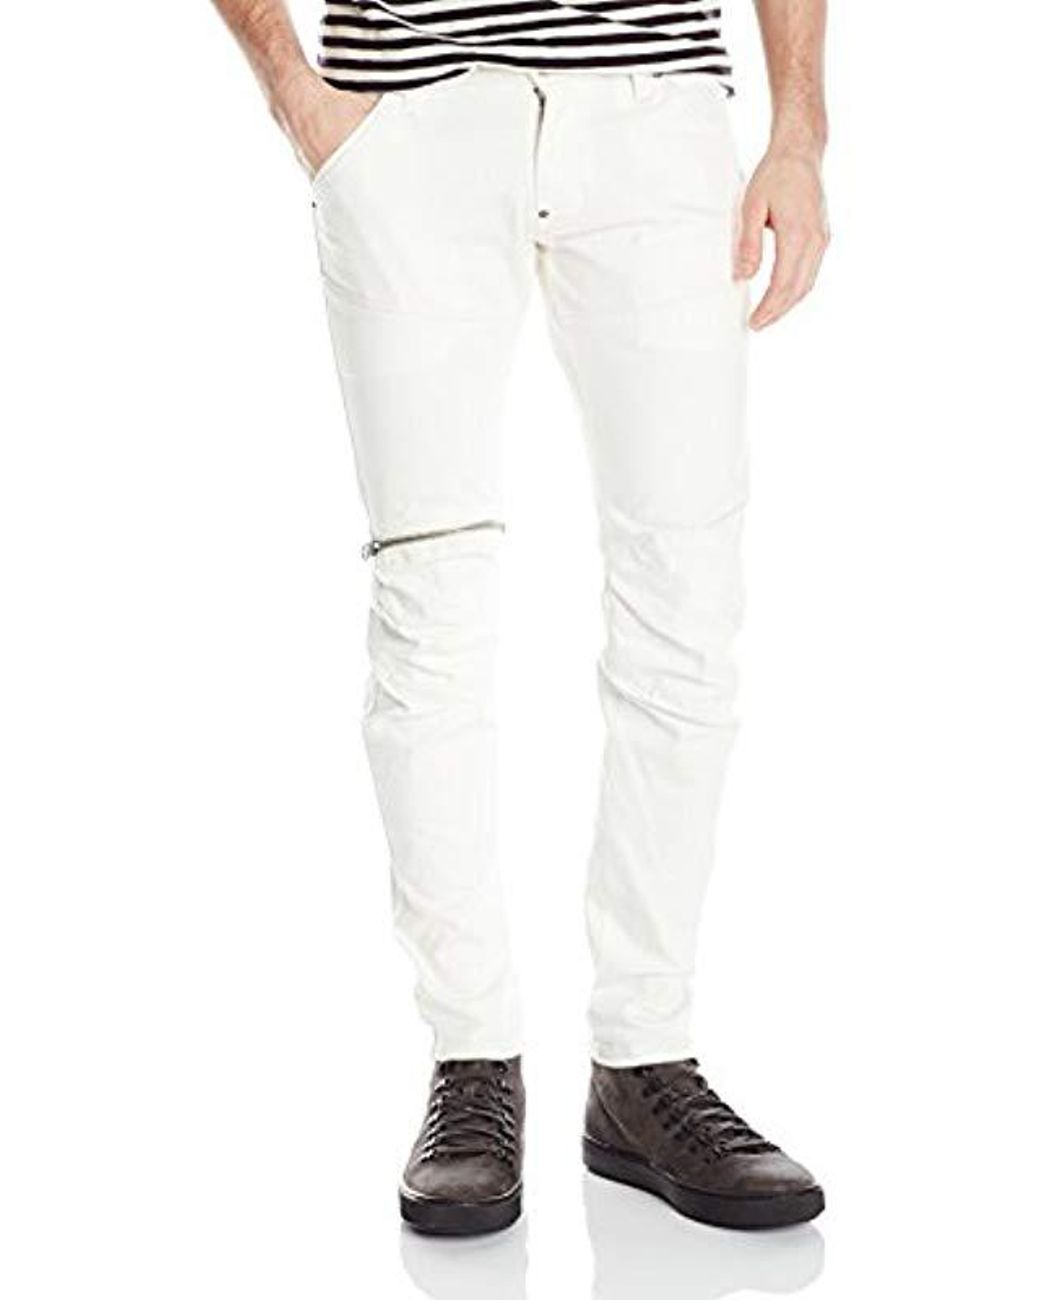 Jeans Herrenmode G-Star D-Staq 5 Pocket Inza Stretch White Jeans Kleidung &  Accessoires Herrenmode